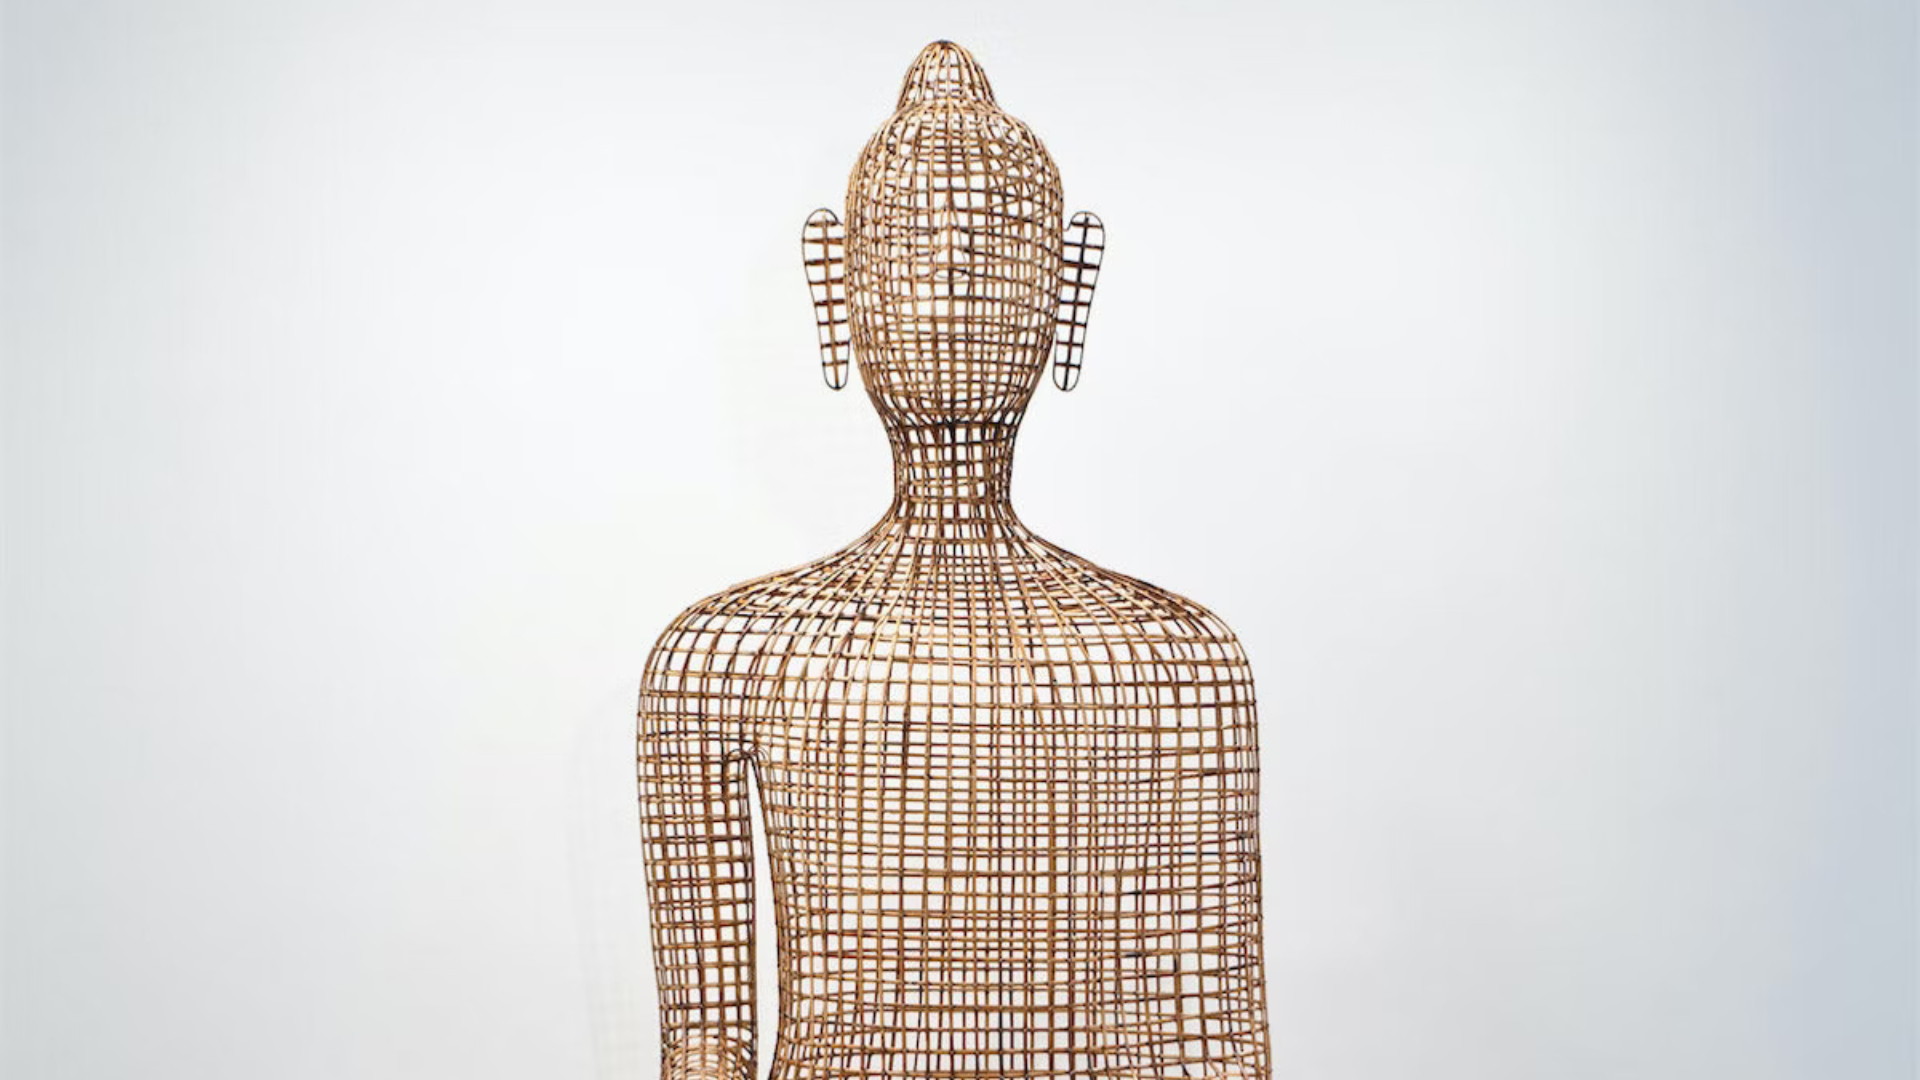 Soheap Pich - Featured Artwork (large bamboo statue of Buddha)